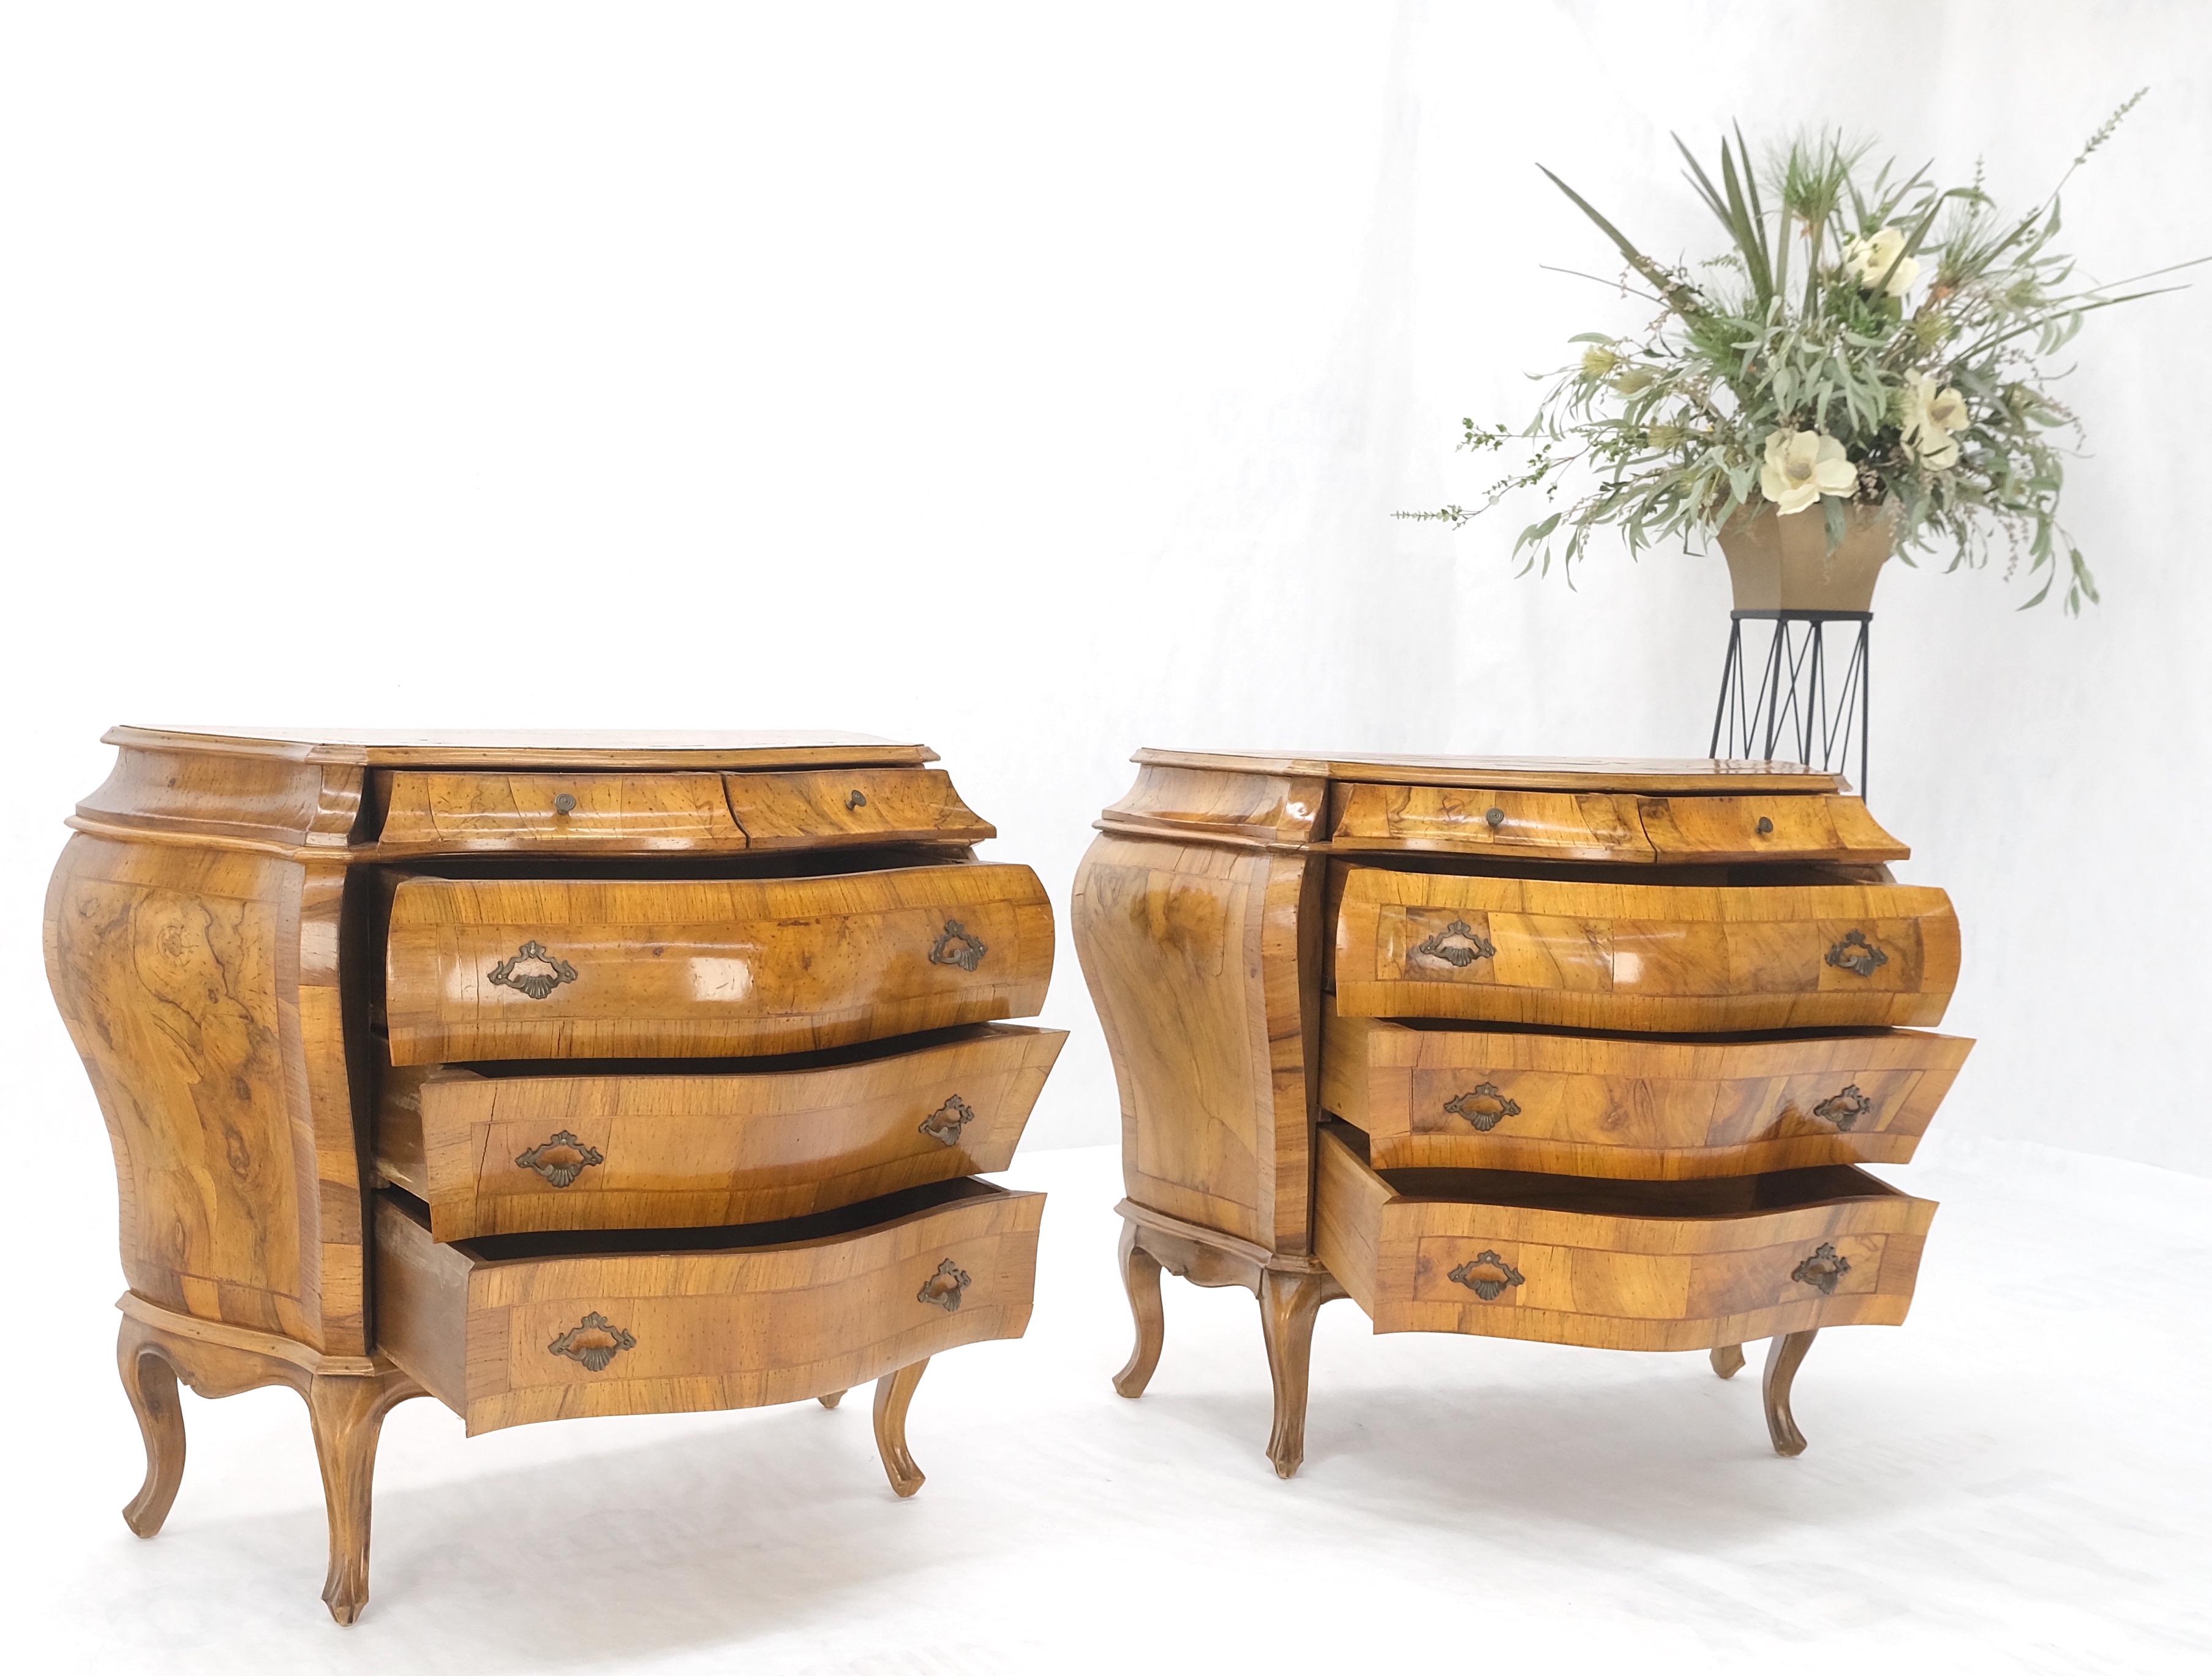 Pair of Italian Olive Burl Wood Patched Veneer Bombay Small Dresser Stands Table For Sale 1